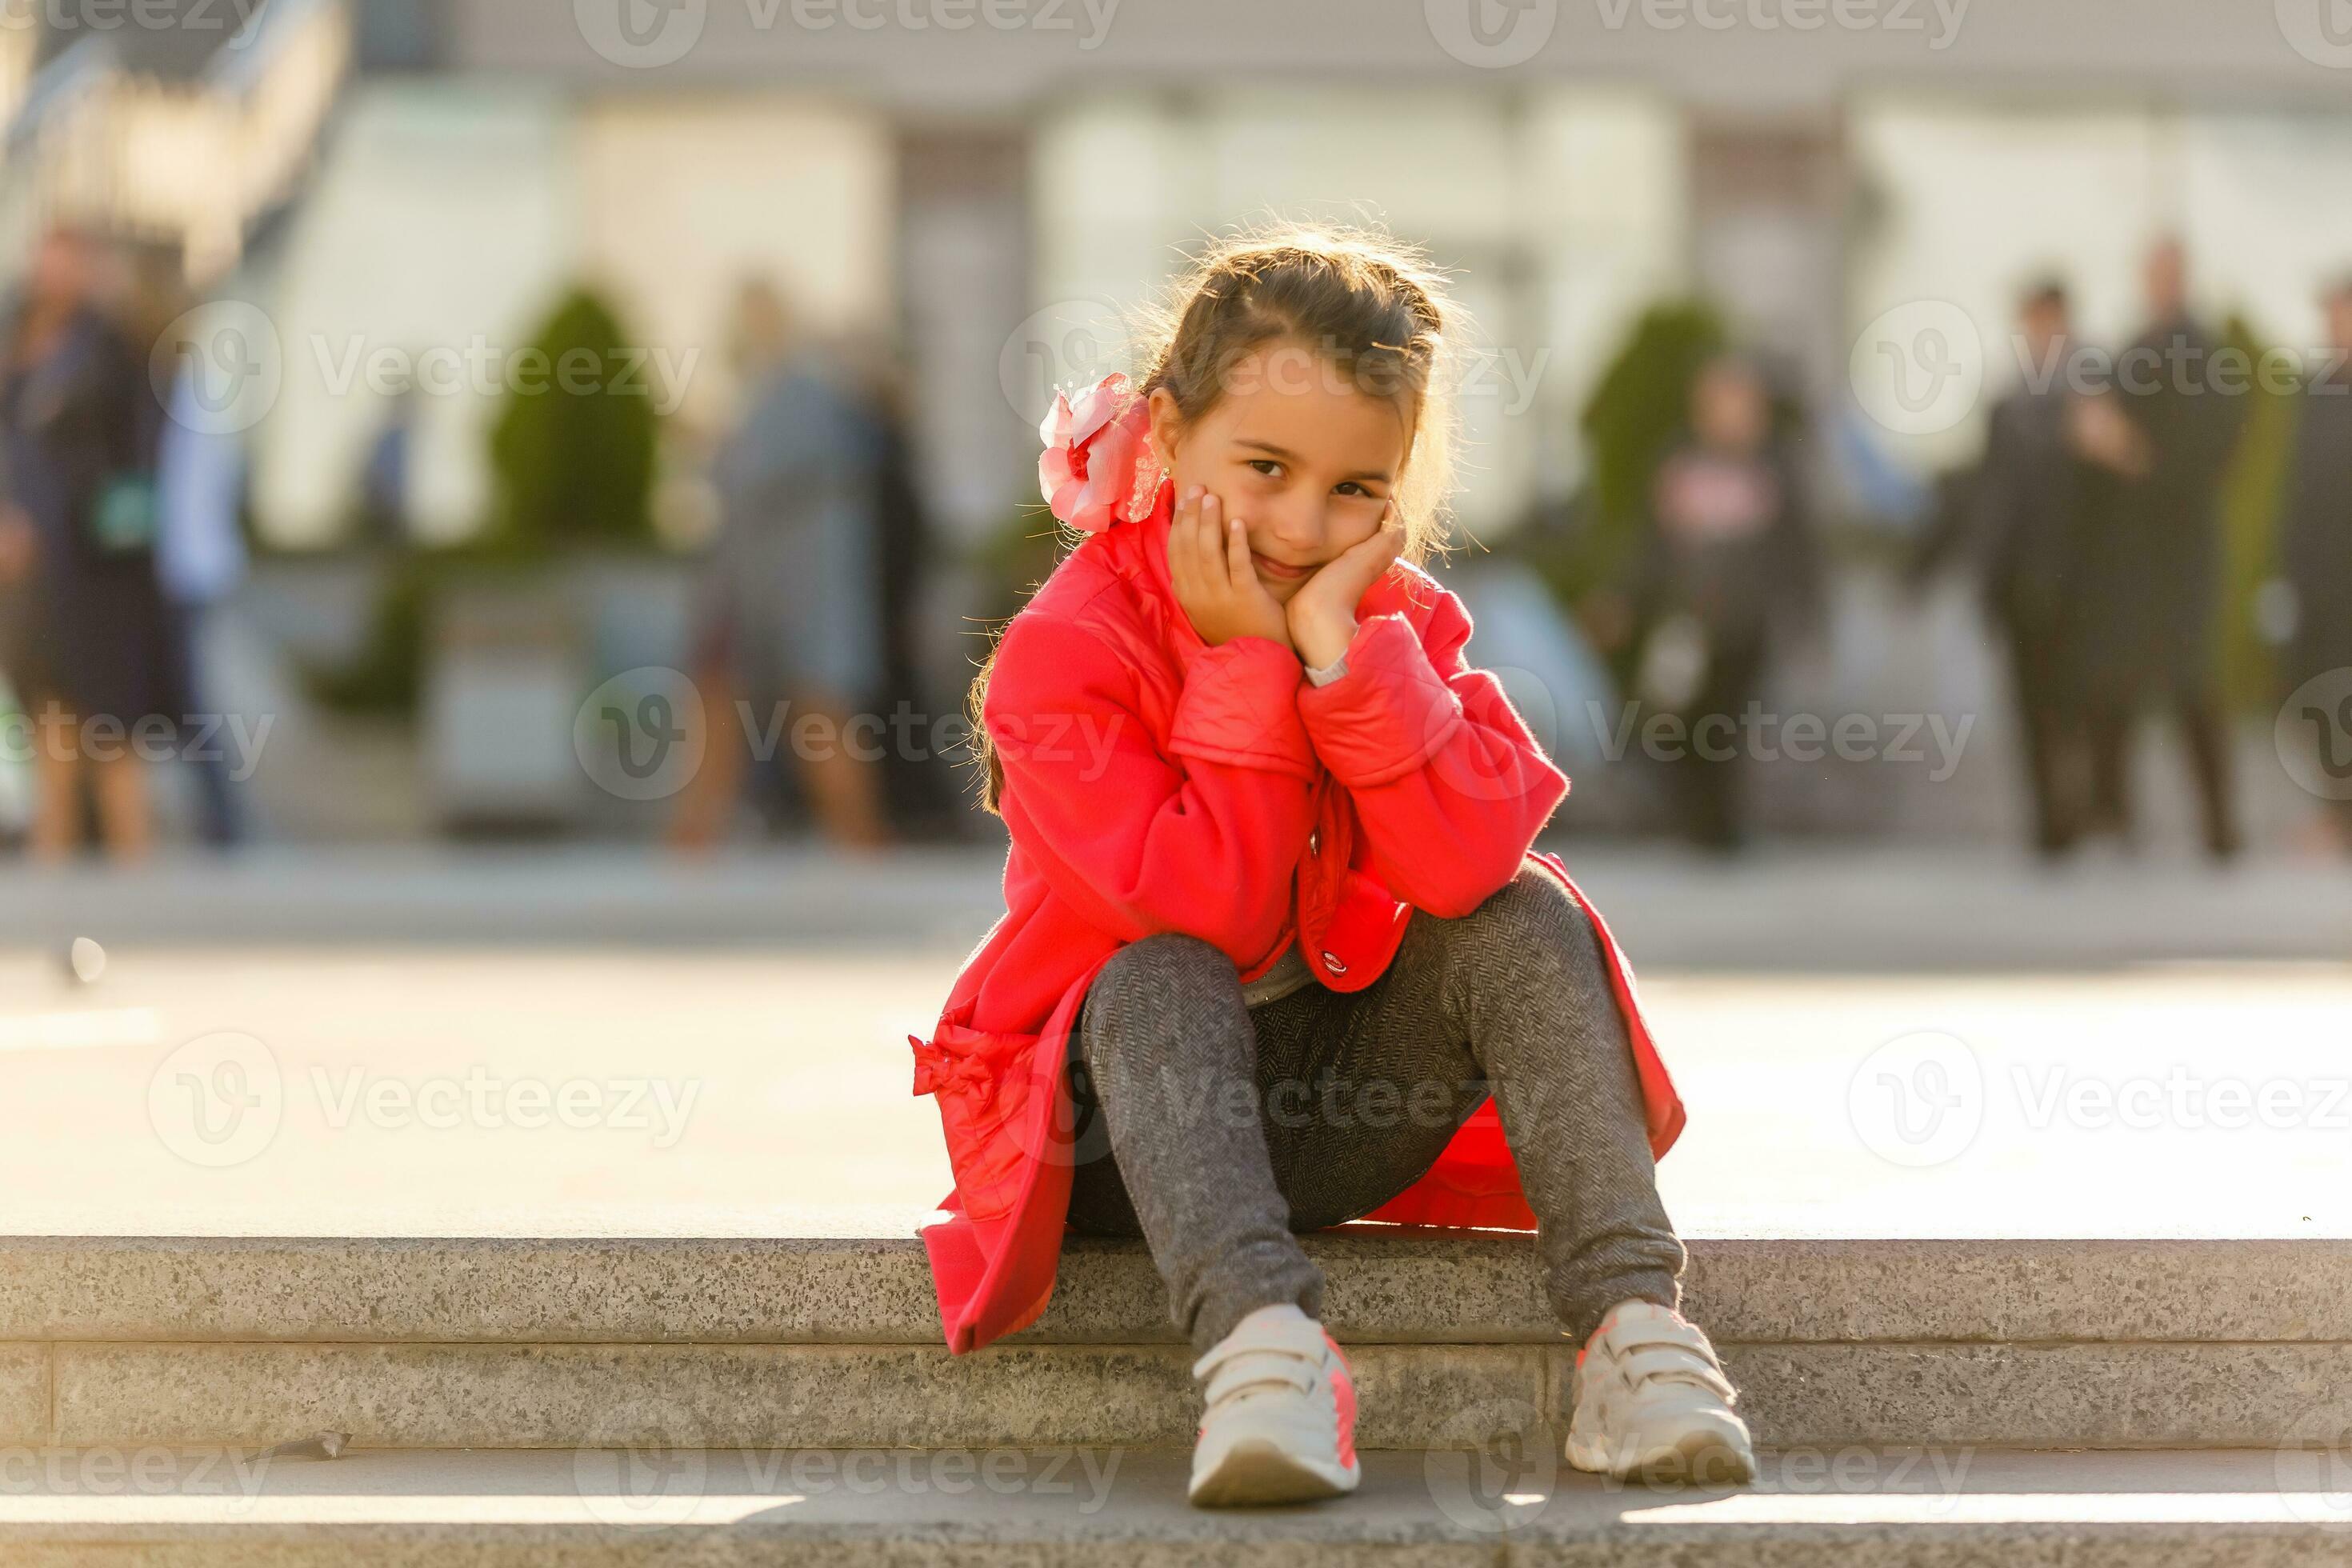 Cute little girl wearing red coat, grey leggings, and white sneakers.  Fashion concept 26461319 Stock Photo at Vecteezy